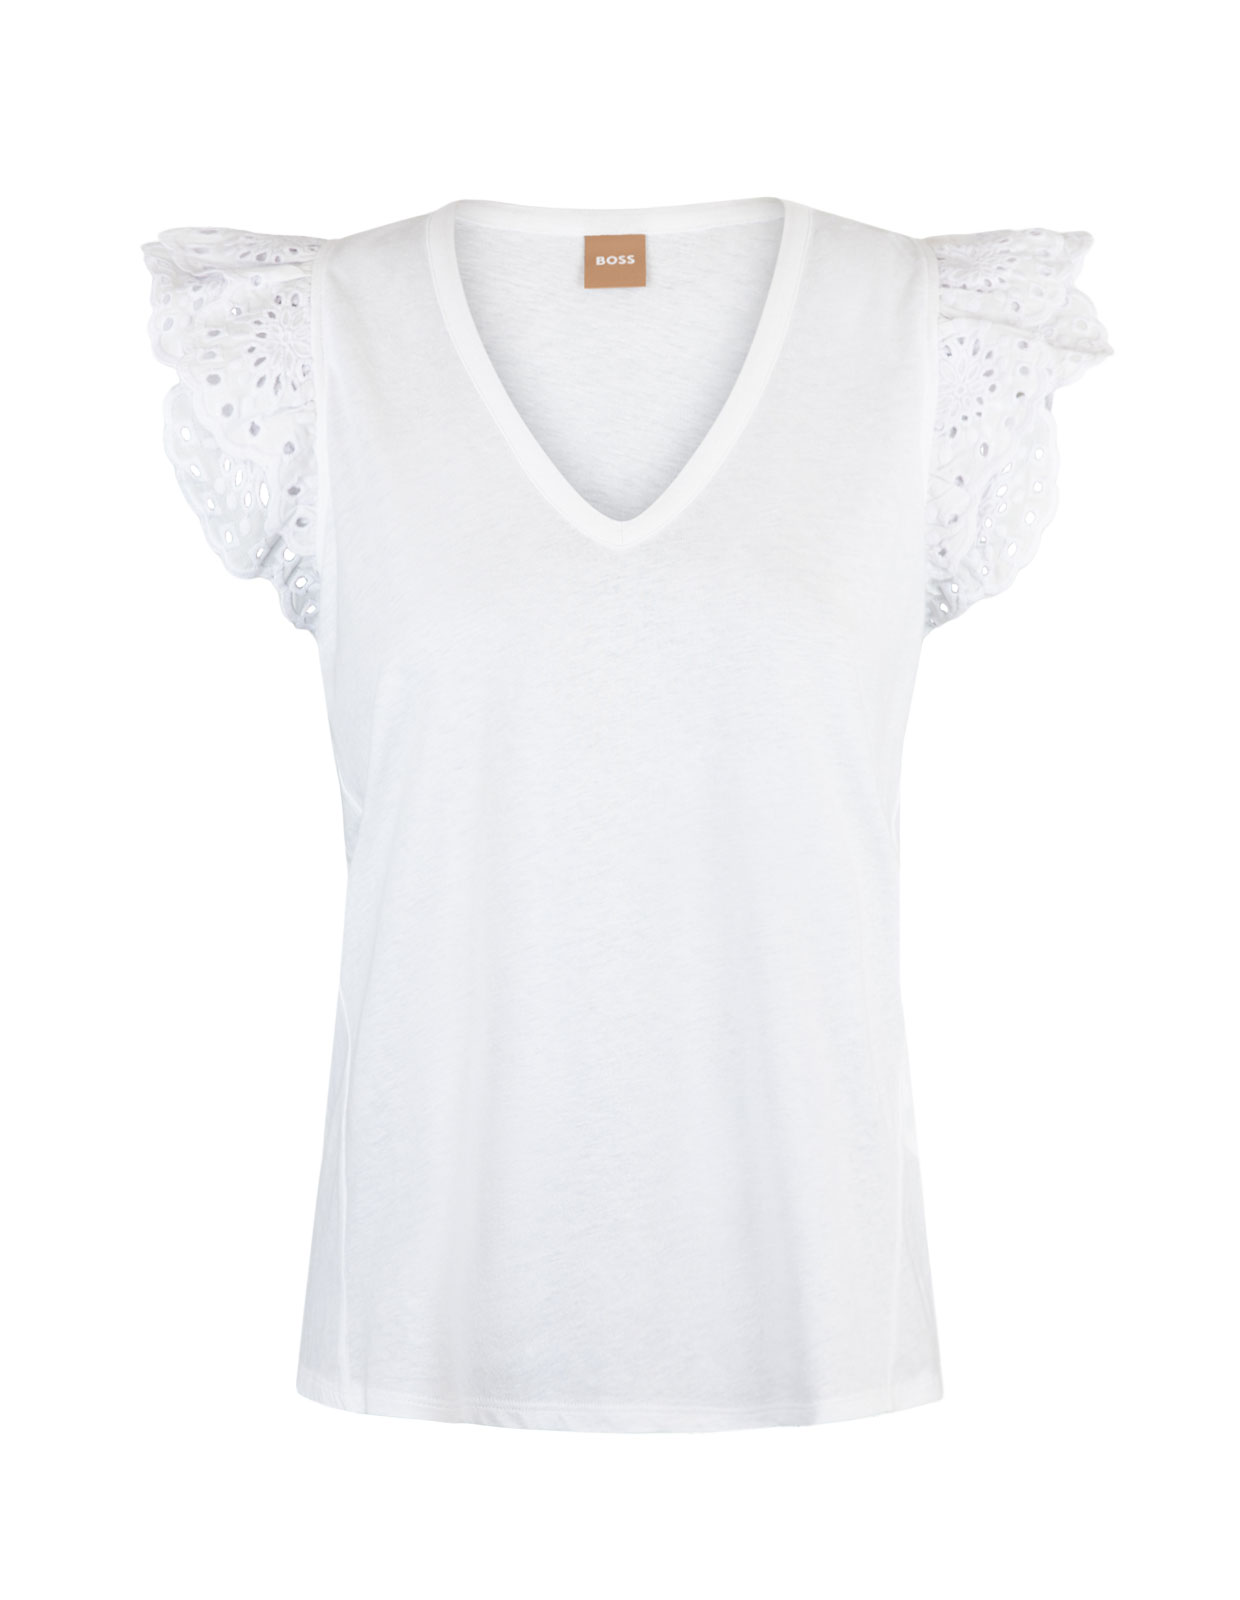 Eboho Embroidered Top White